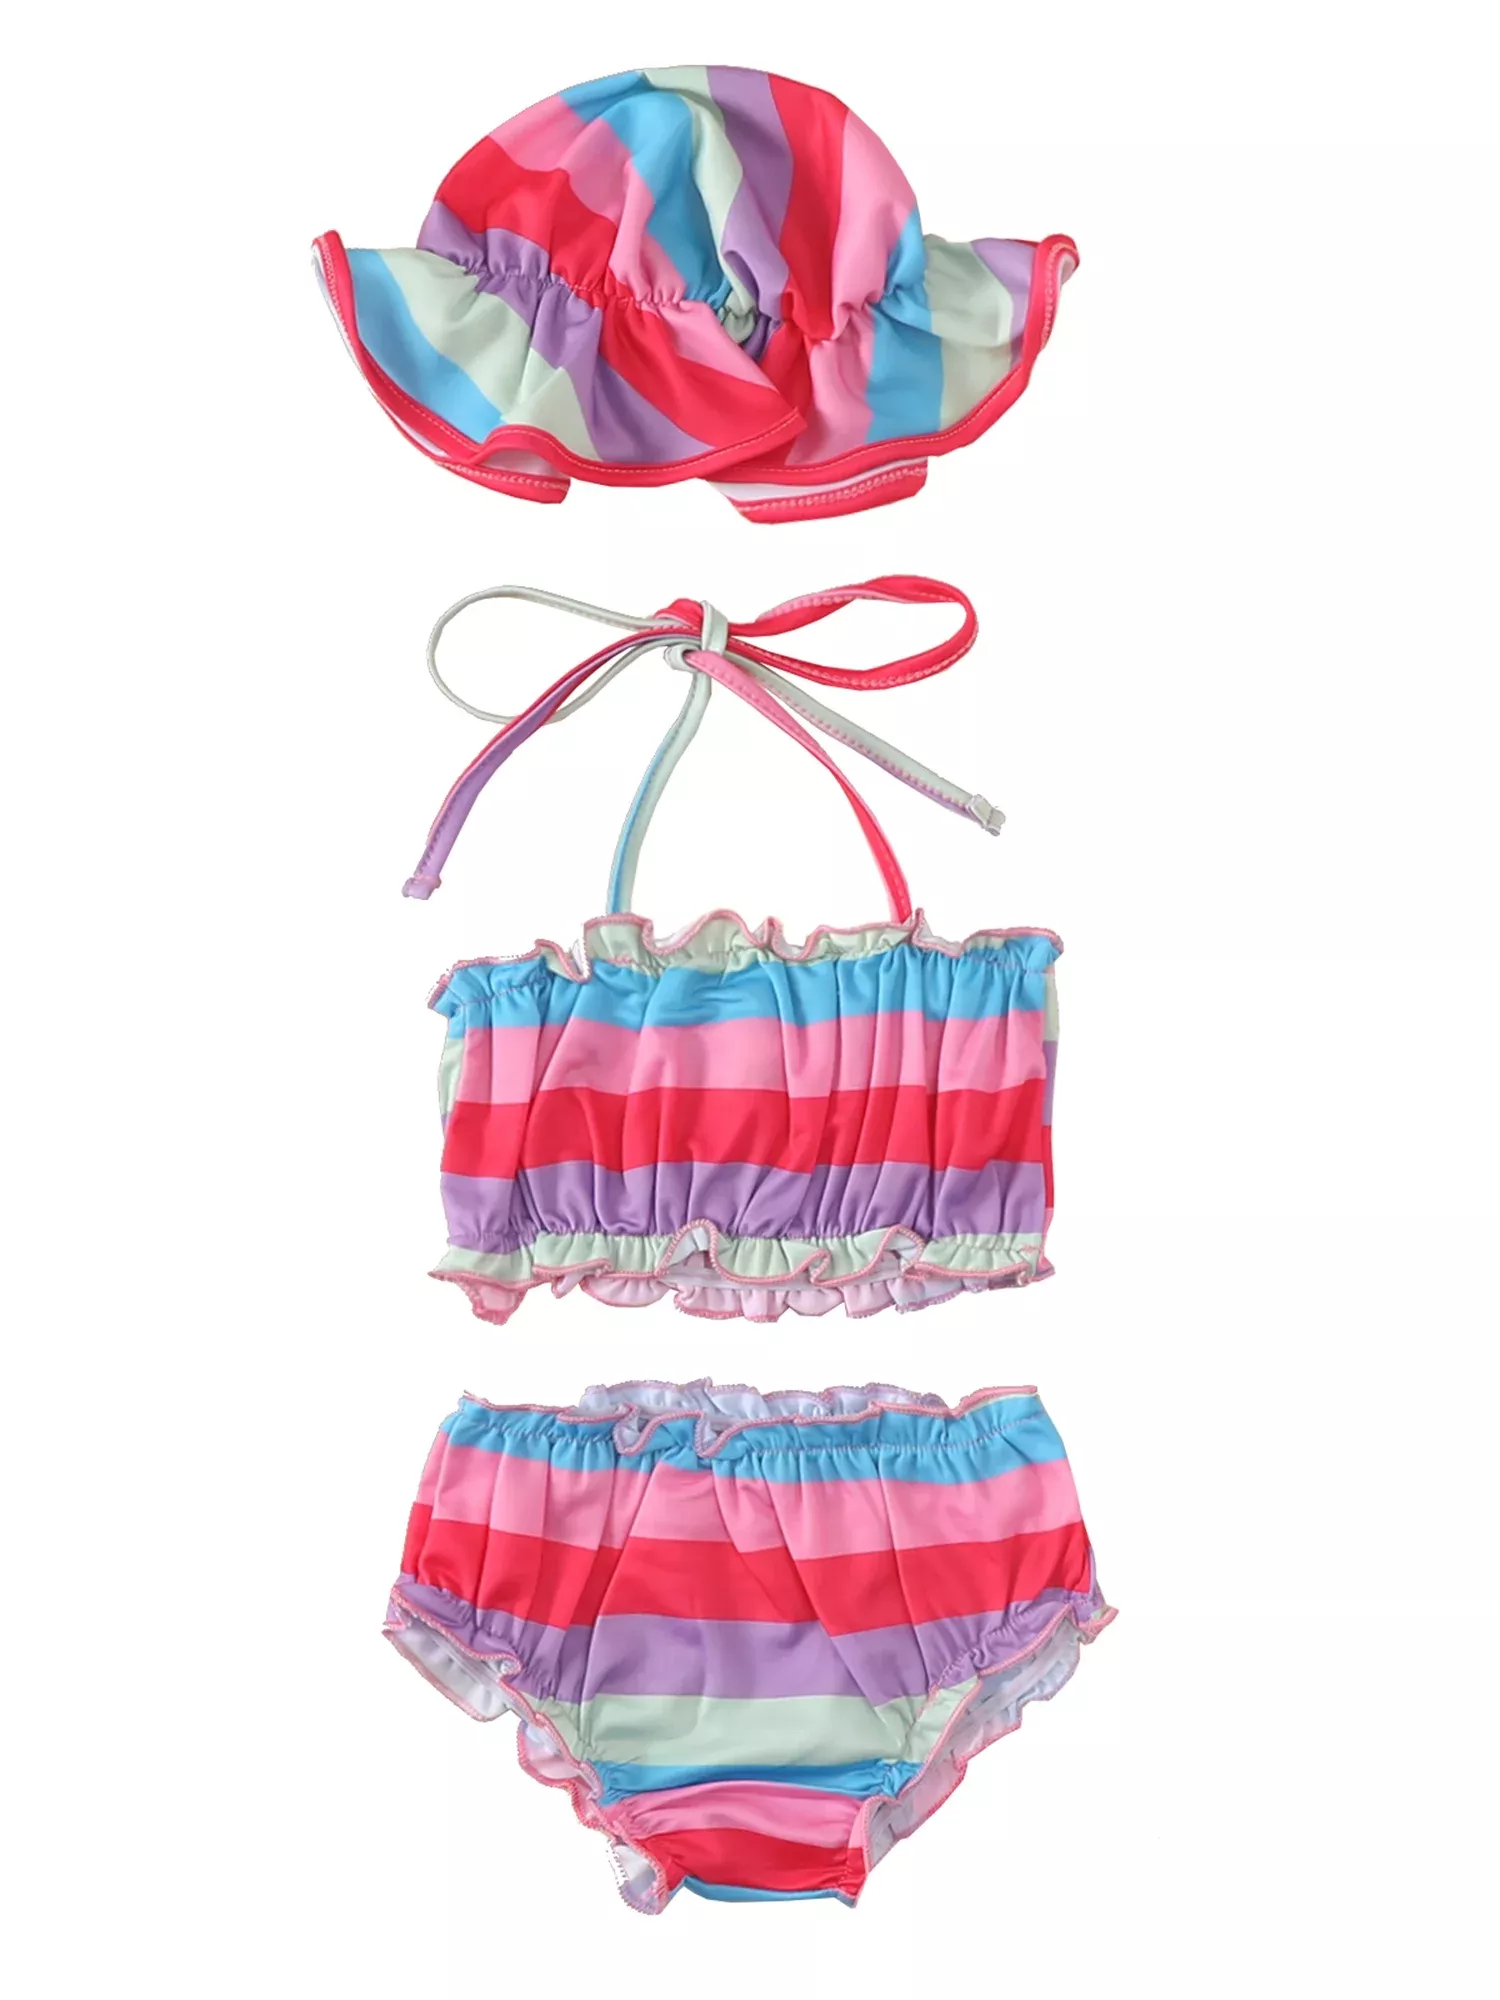 Bagilaanoe Toddler Baby Girl Two Piece Swimsuit Set Print / Plaid Pattern Bathing Suit Sleeveless Tank Tops Shorts for 9 Months to 4 Years, Infant